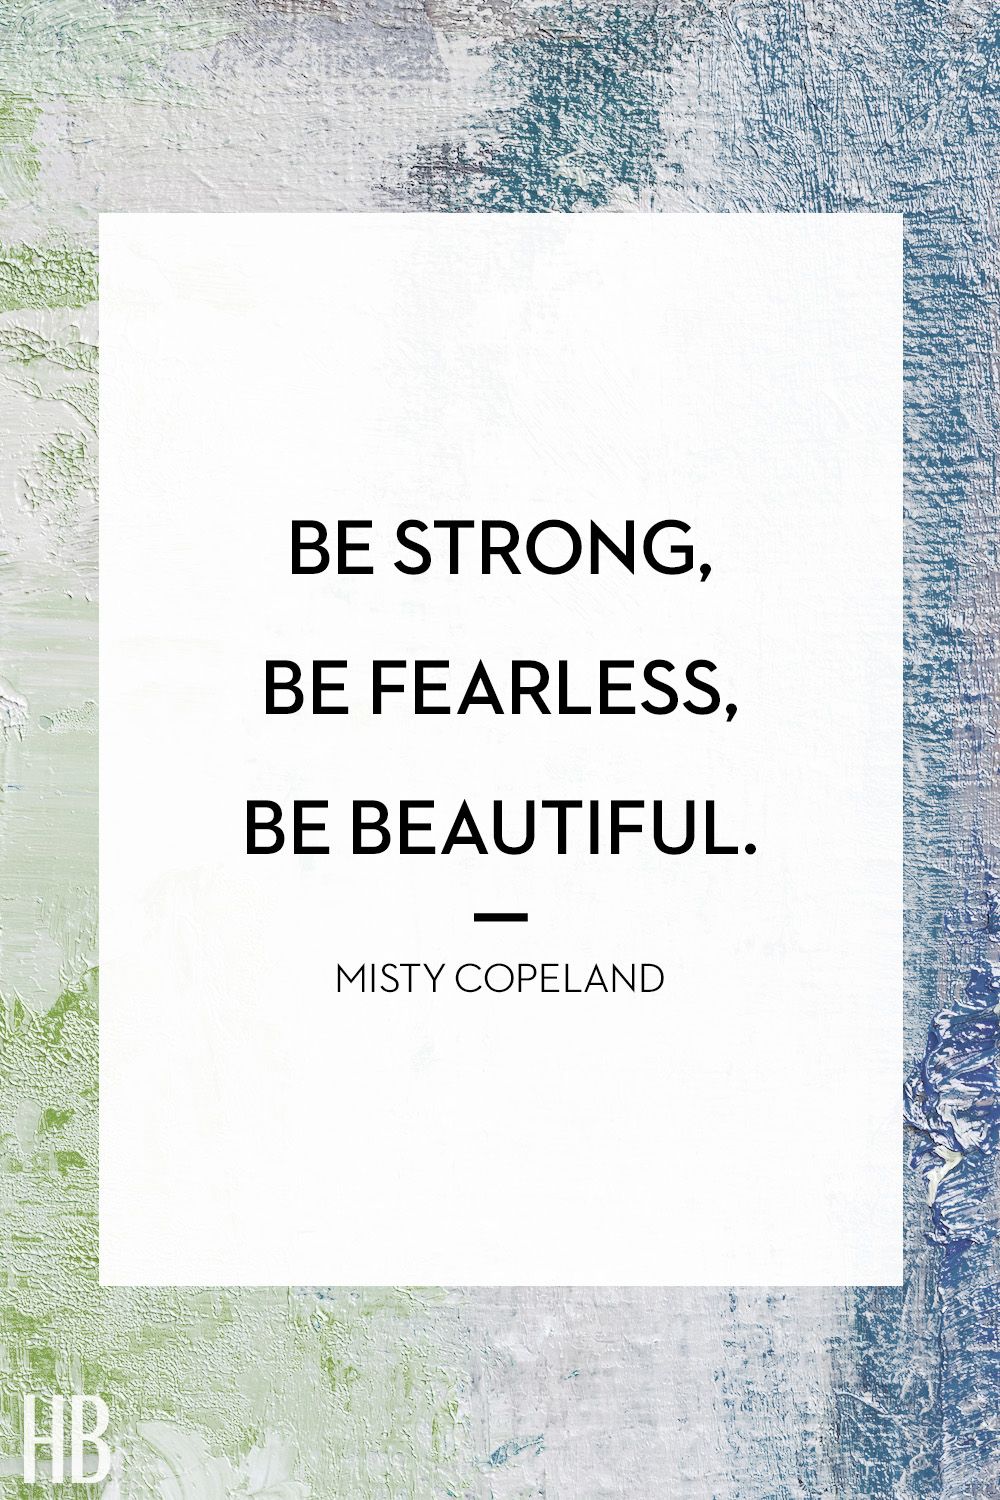 beautiful quotes about being strong